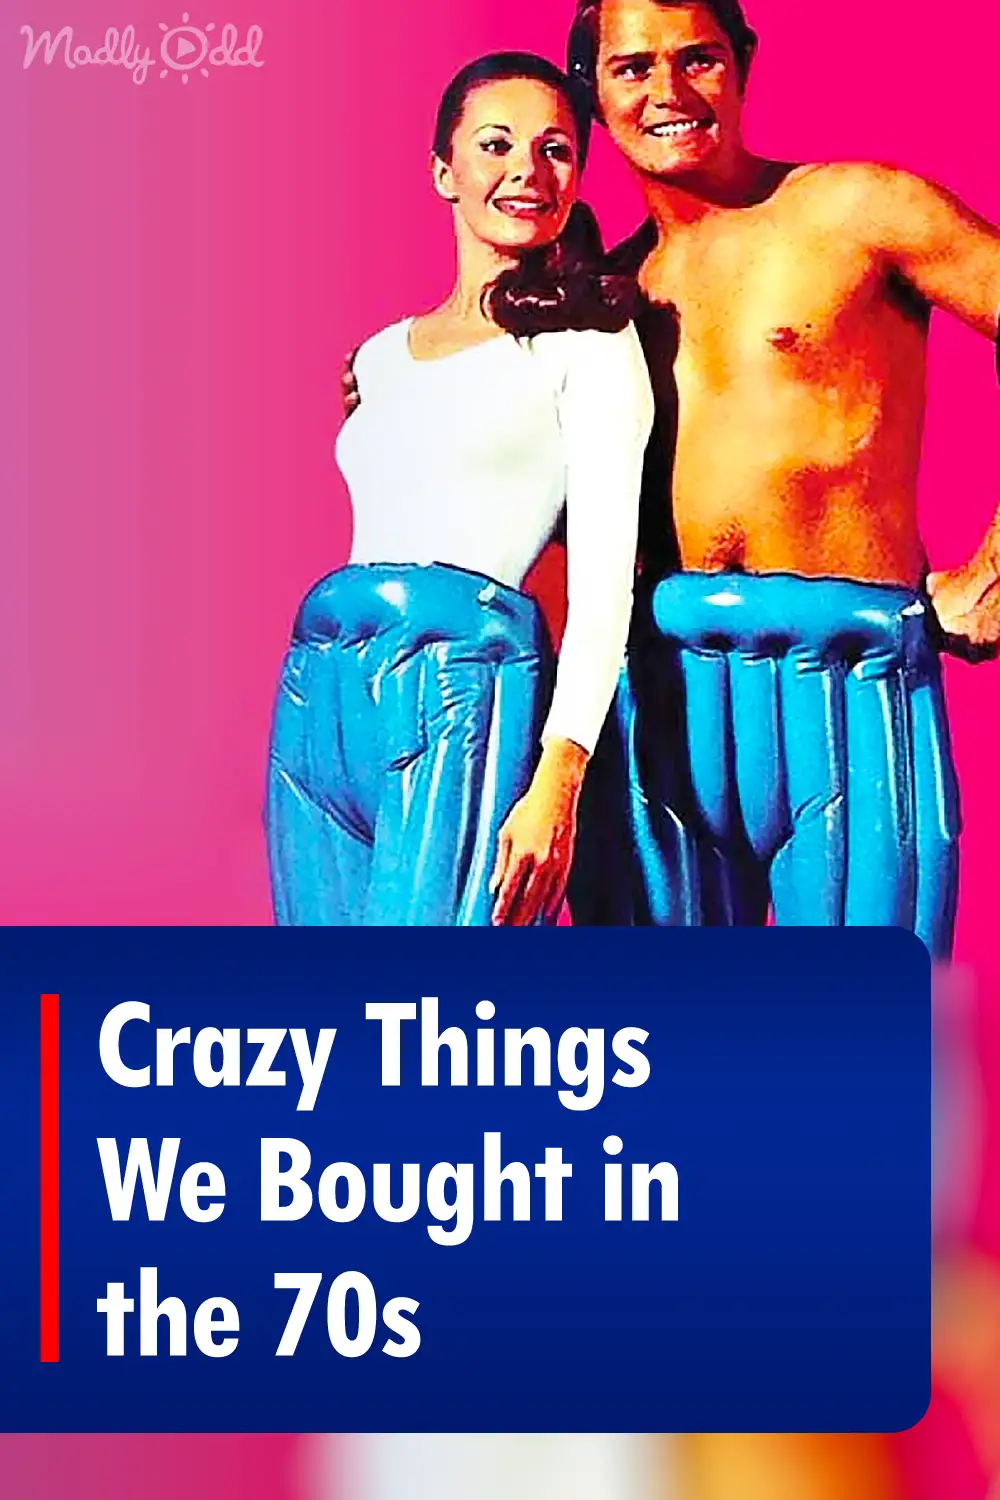 Crazy Things We Bought in the 70s